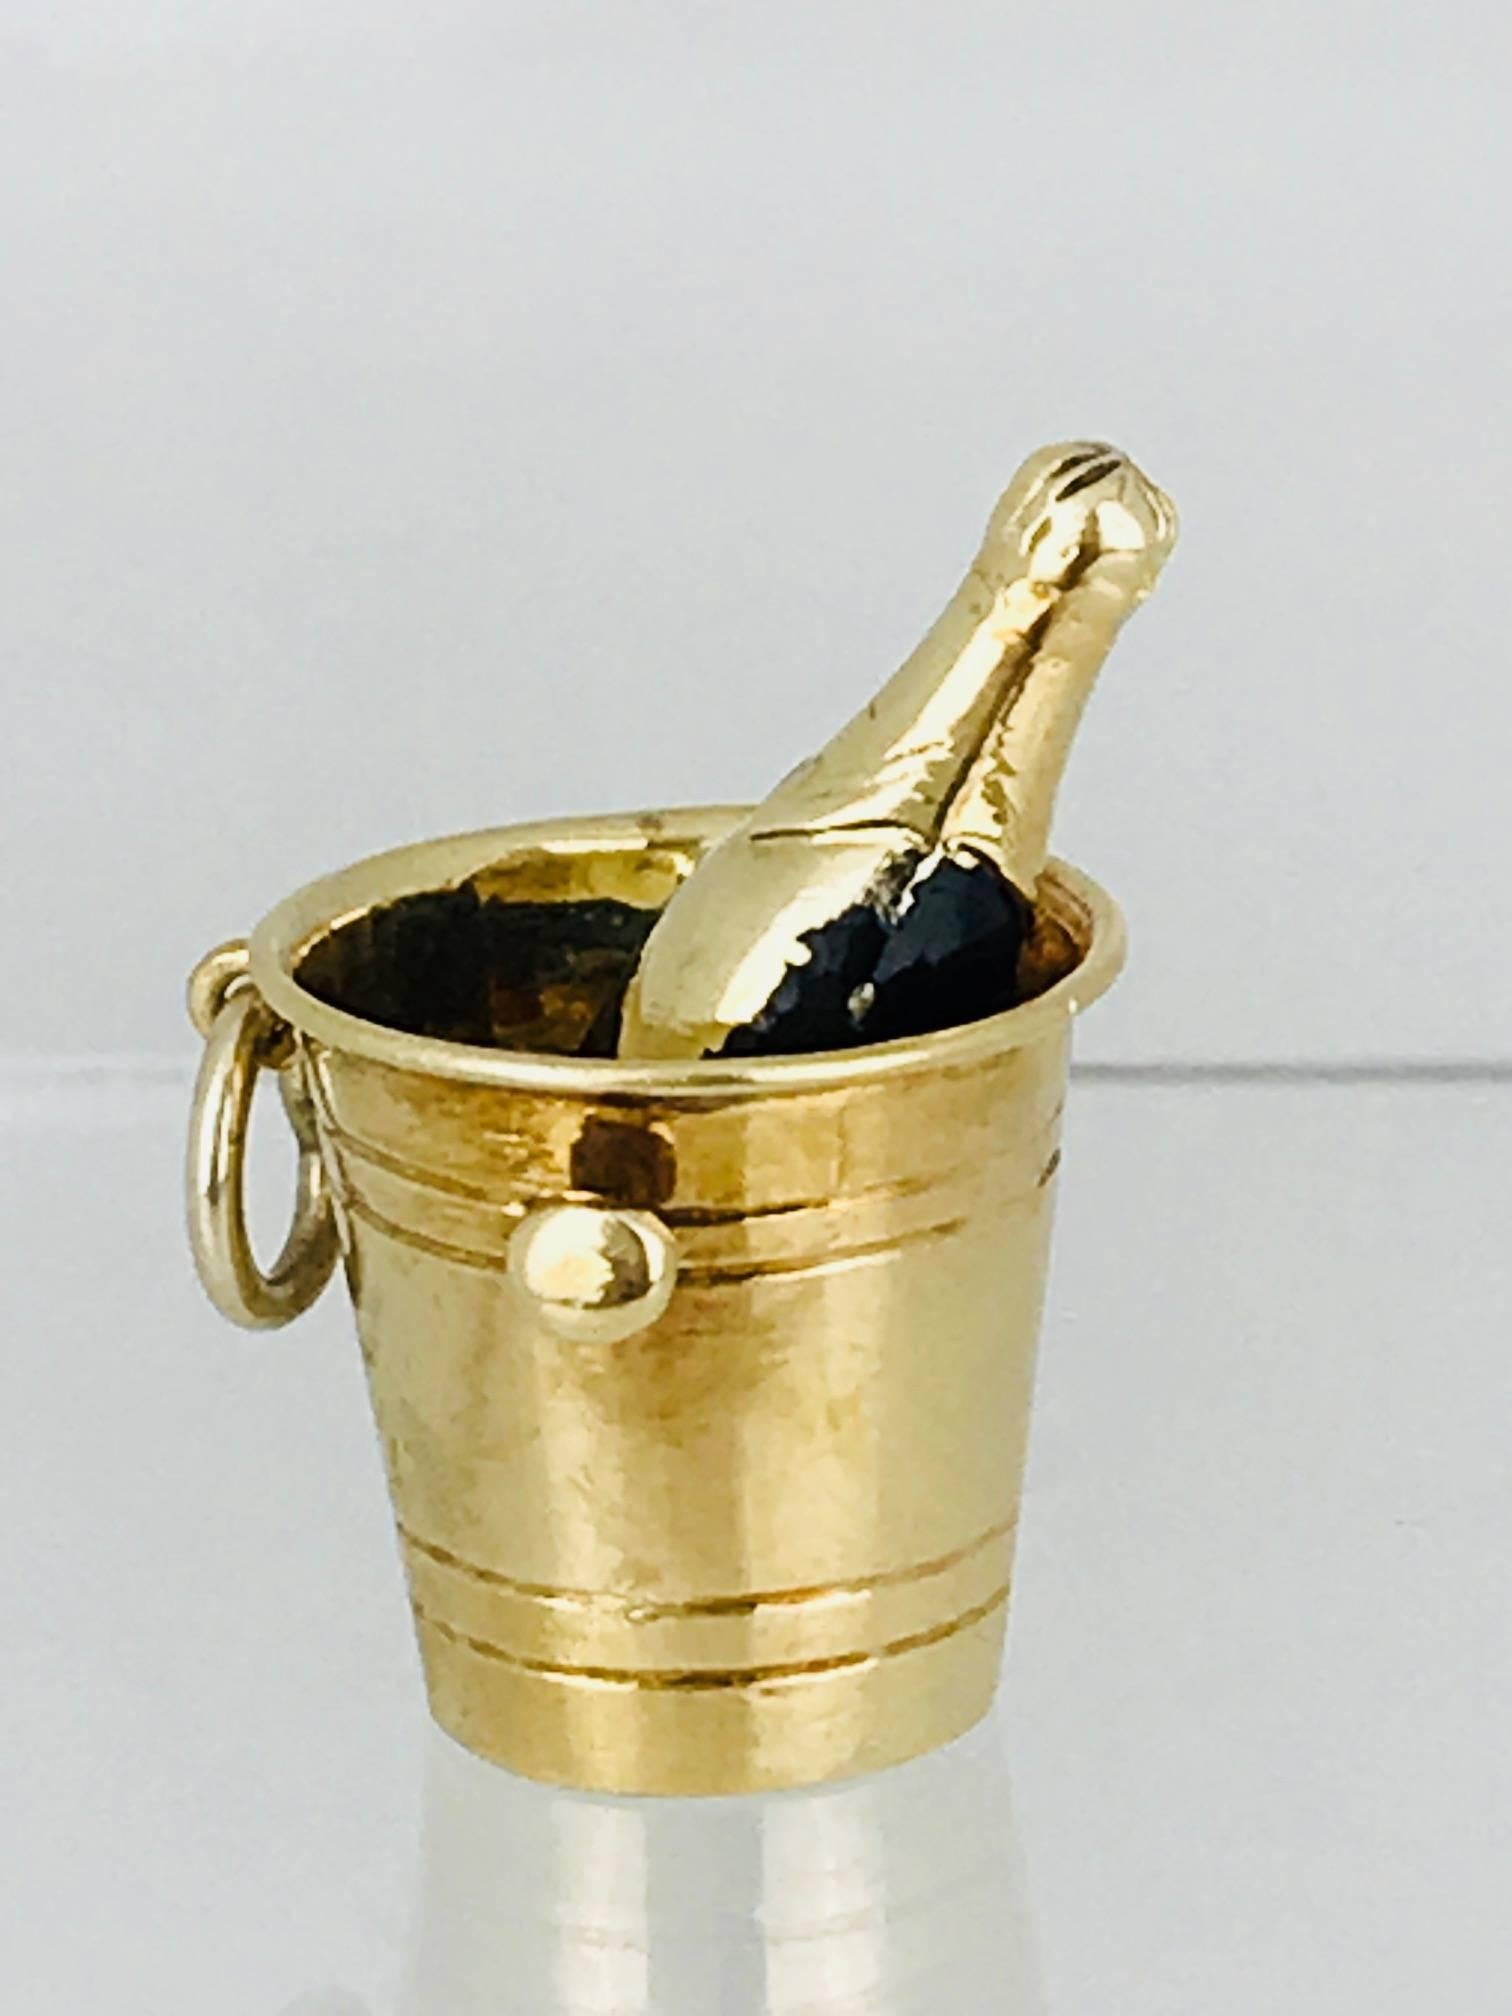 Champagne on Ice, Bucket with Enamel, circa 1950, 14 Karat Gold In Good Condition For Sale In Aliso Viejo, CA